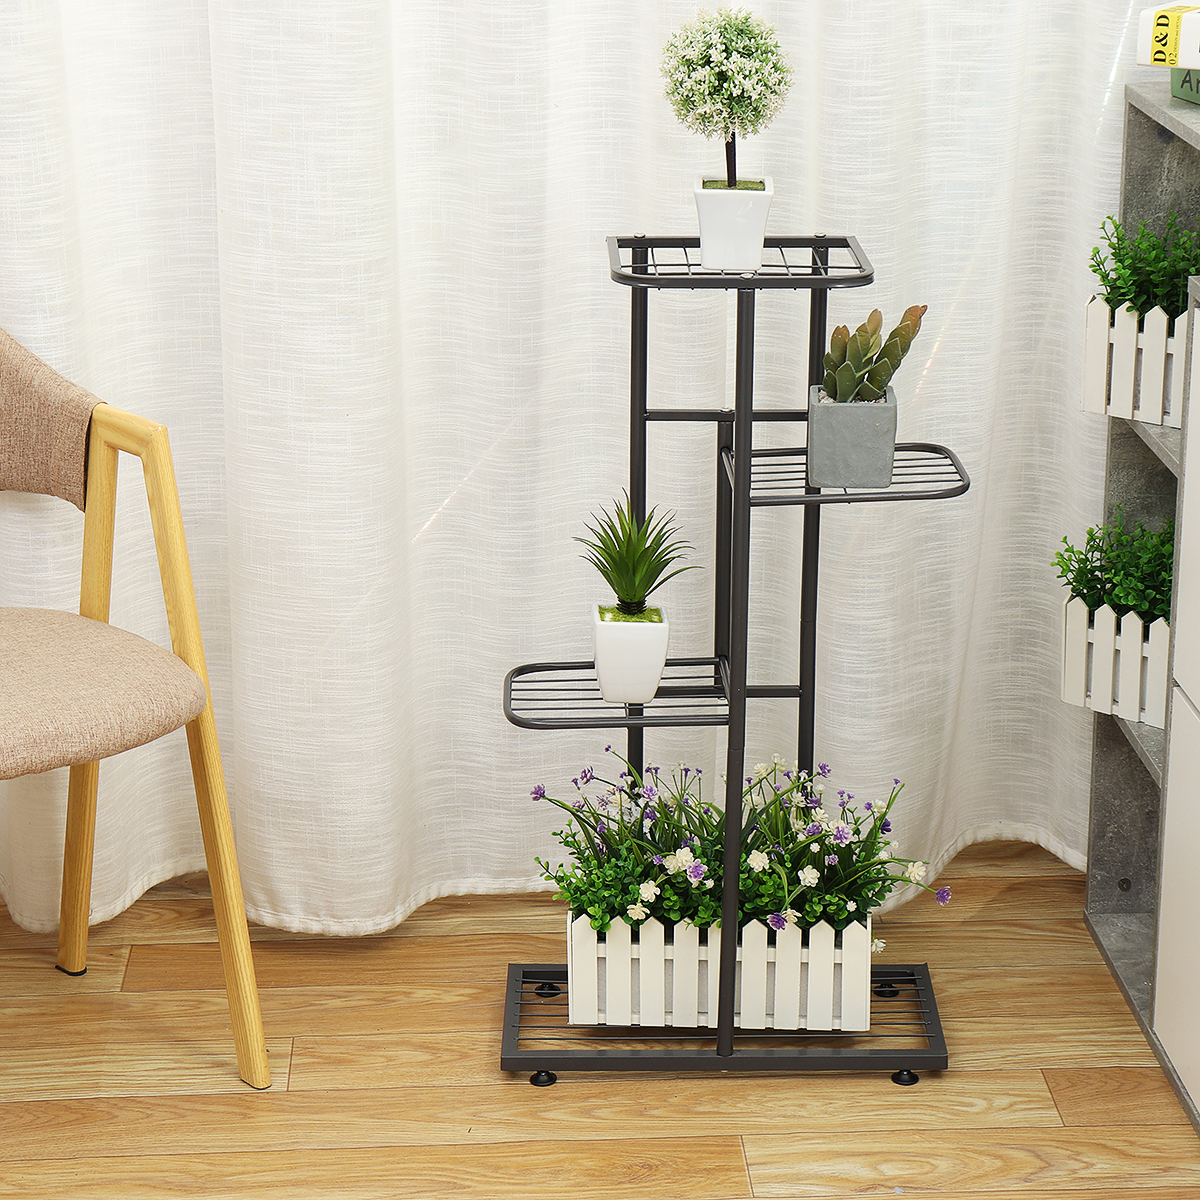 4-Layers-Retro-Iron-Flower-Stand-Pot-Plant-Display-Shelves-Garden-Home-Decoration-1720861-3